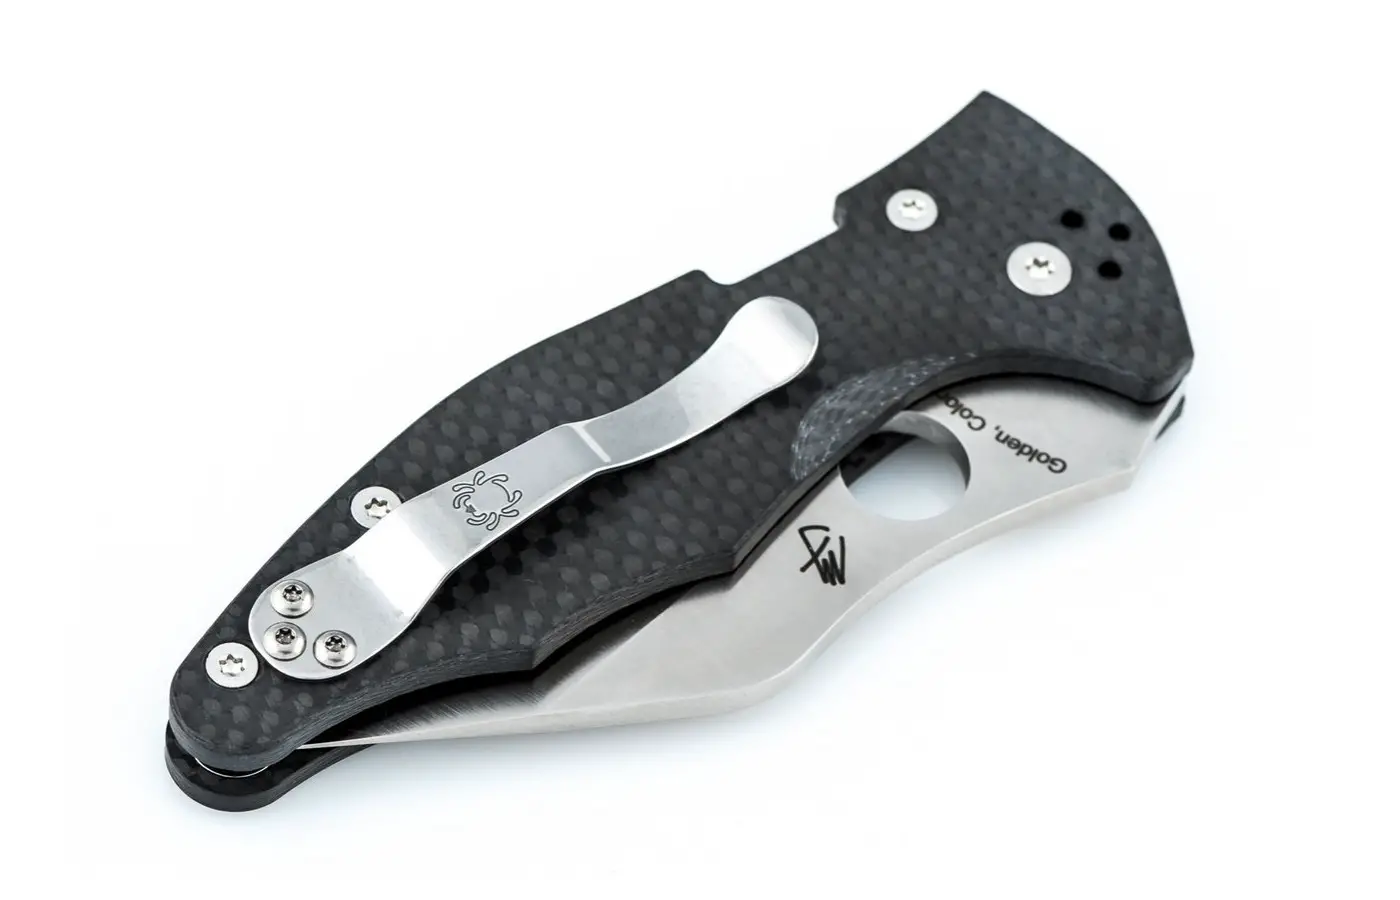 The knife can be configured for left or right hand carry in either the tip-down or tip-up position with the four-position pocket clip.